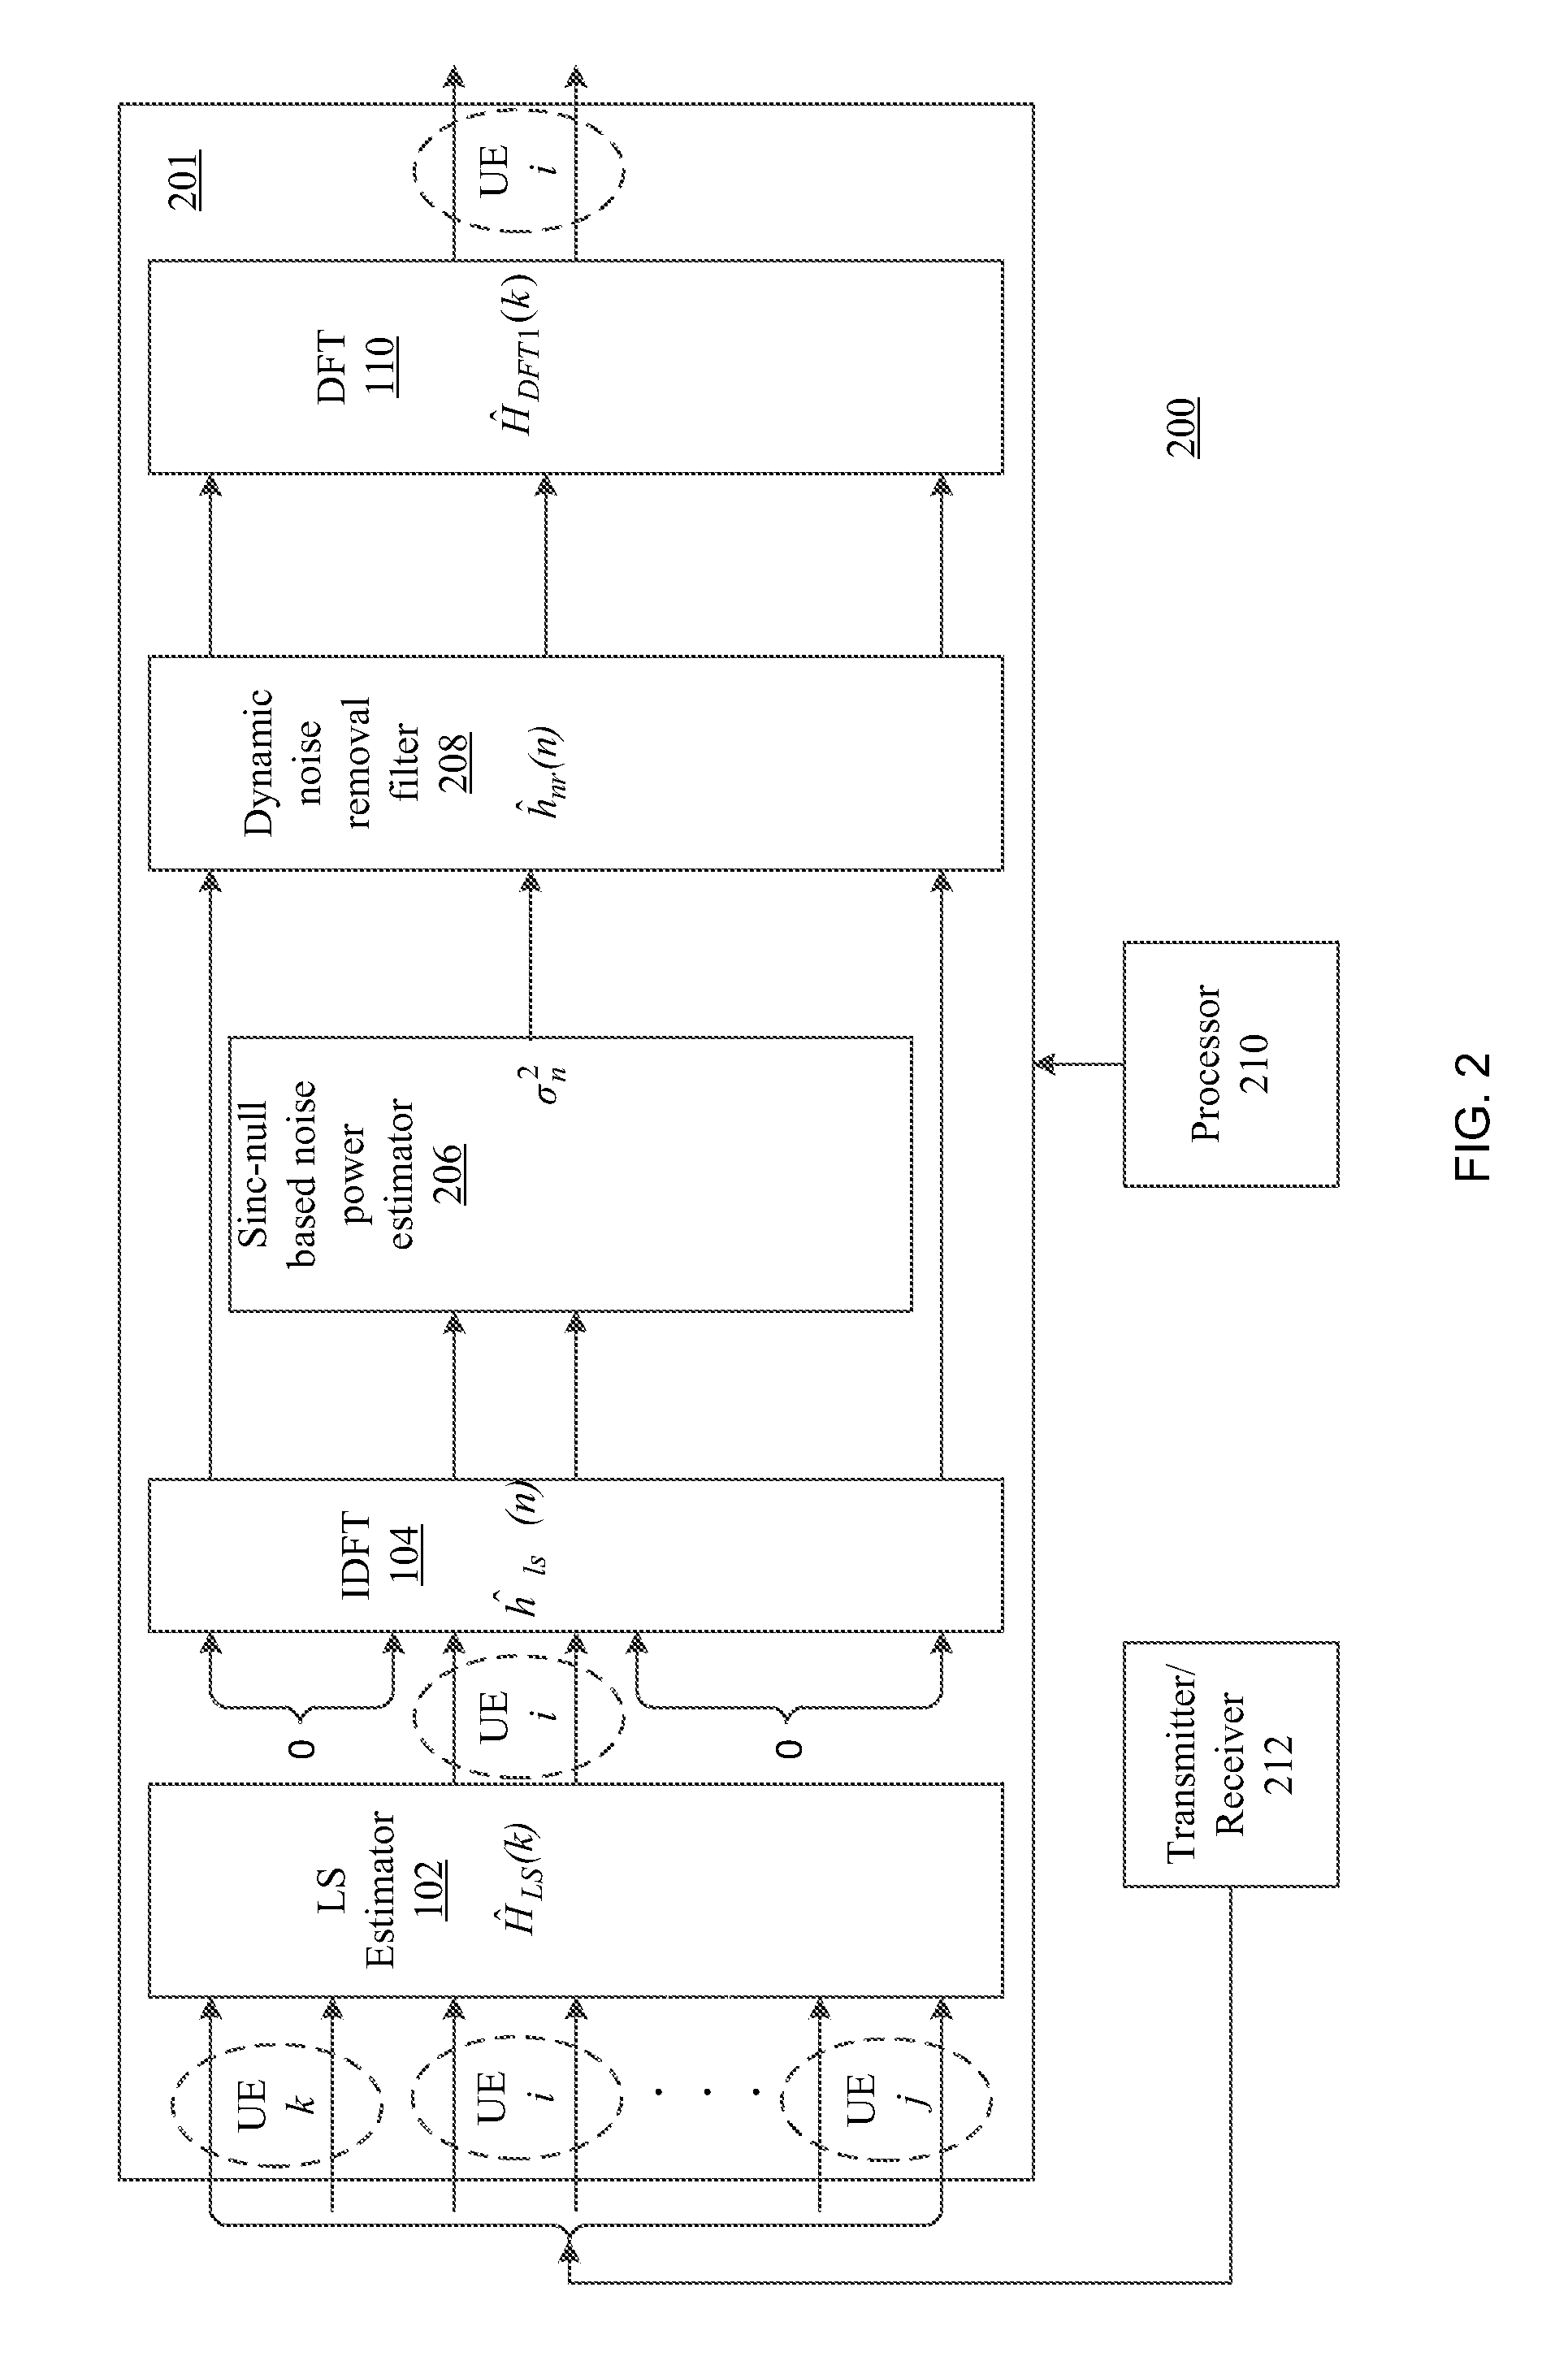 Dft-based channel estimation systems and methods